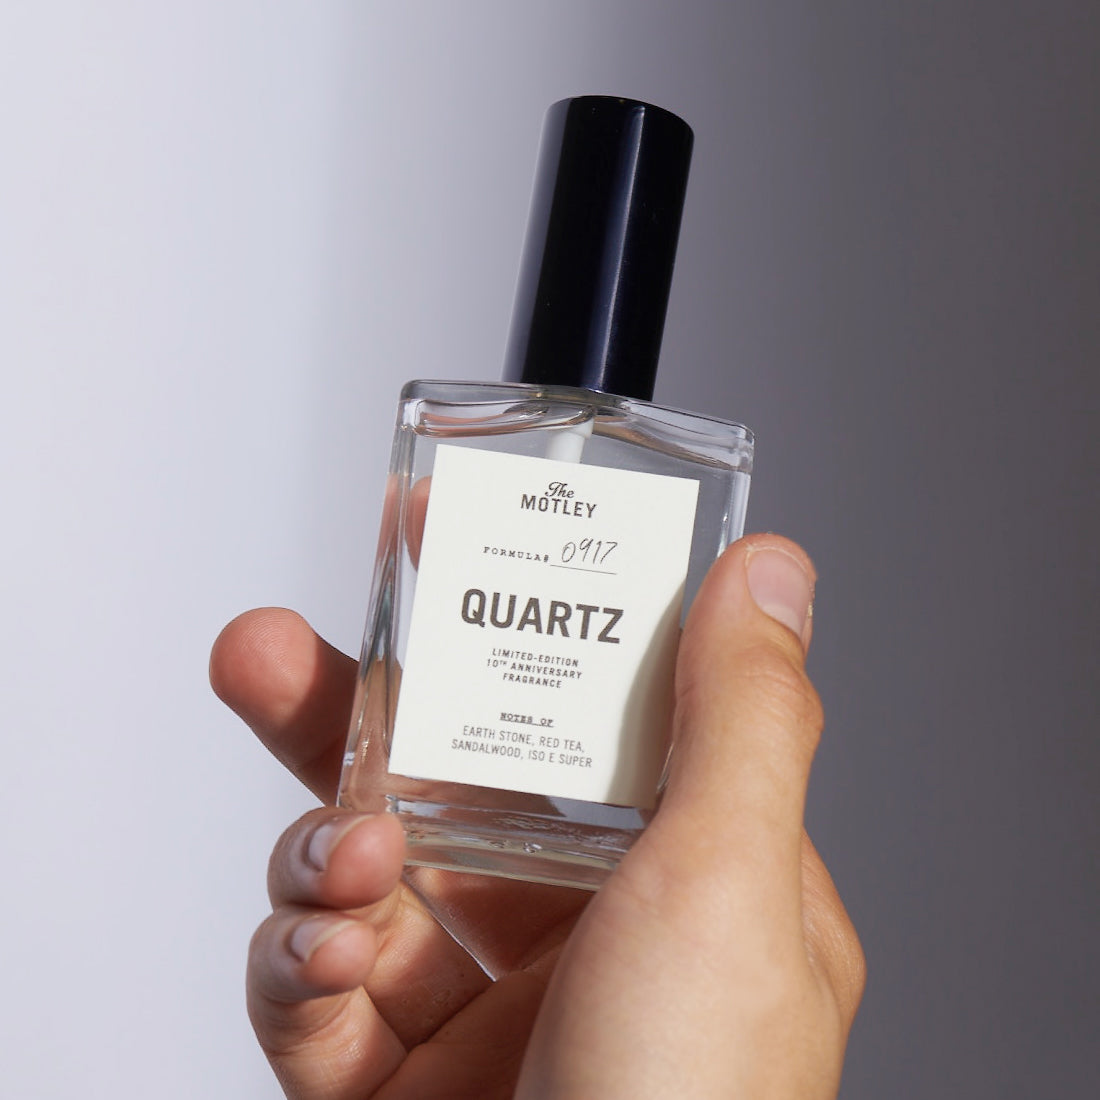 A hand holds The Motley Quartz Fragrance in a clear glass bottle with clear liquid and a black pump cap against a gray background.